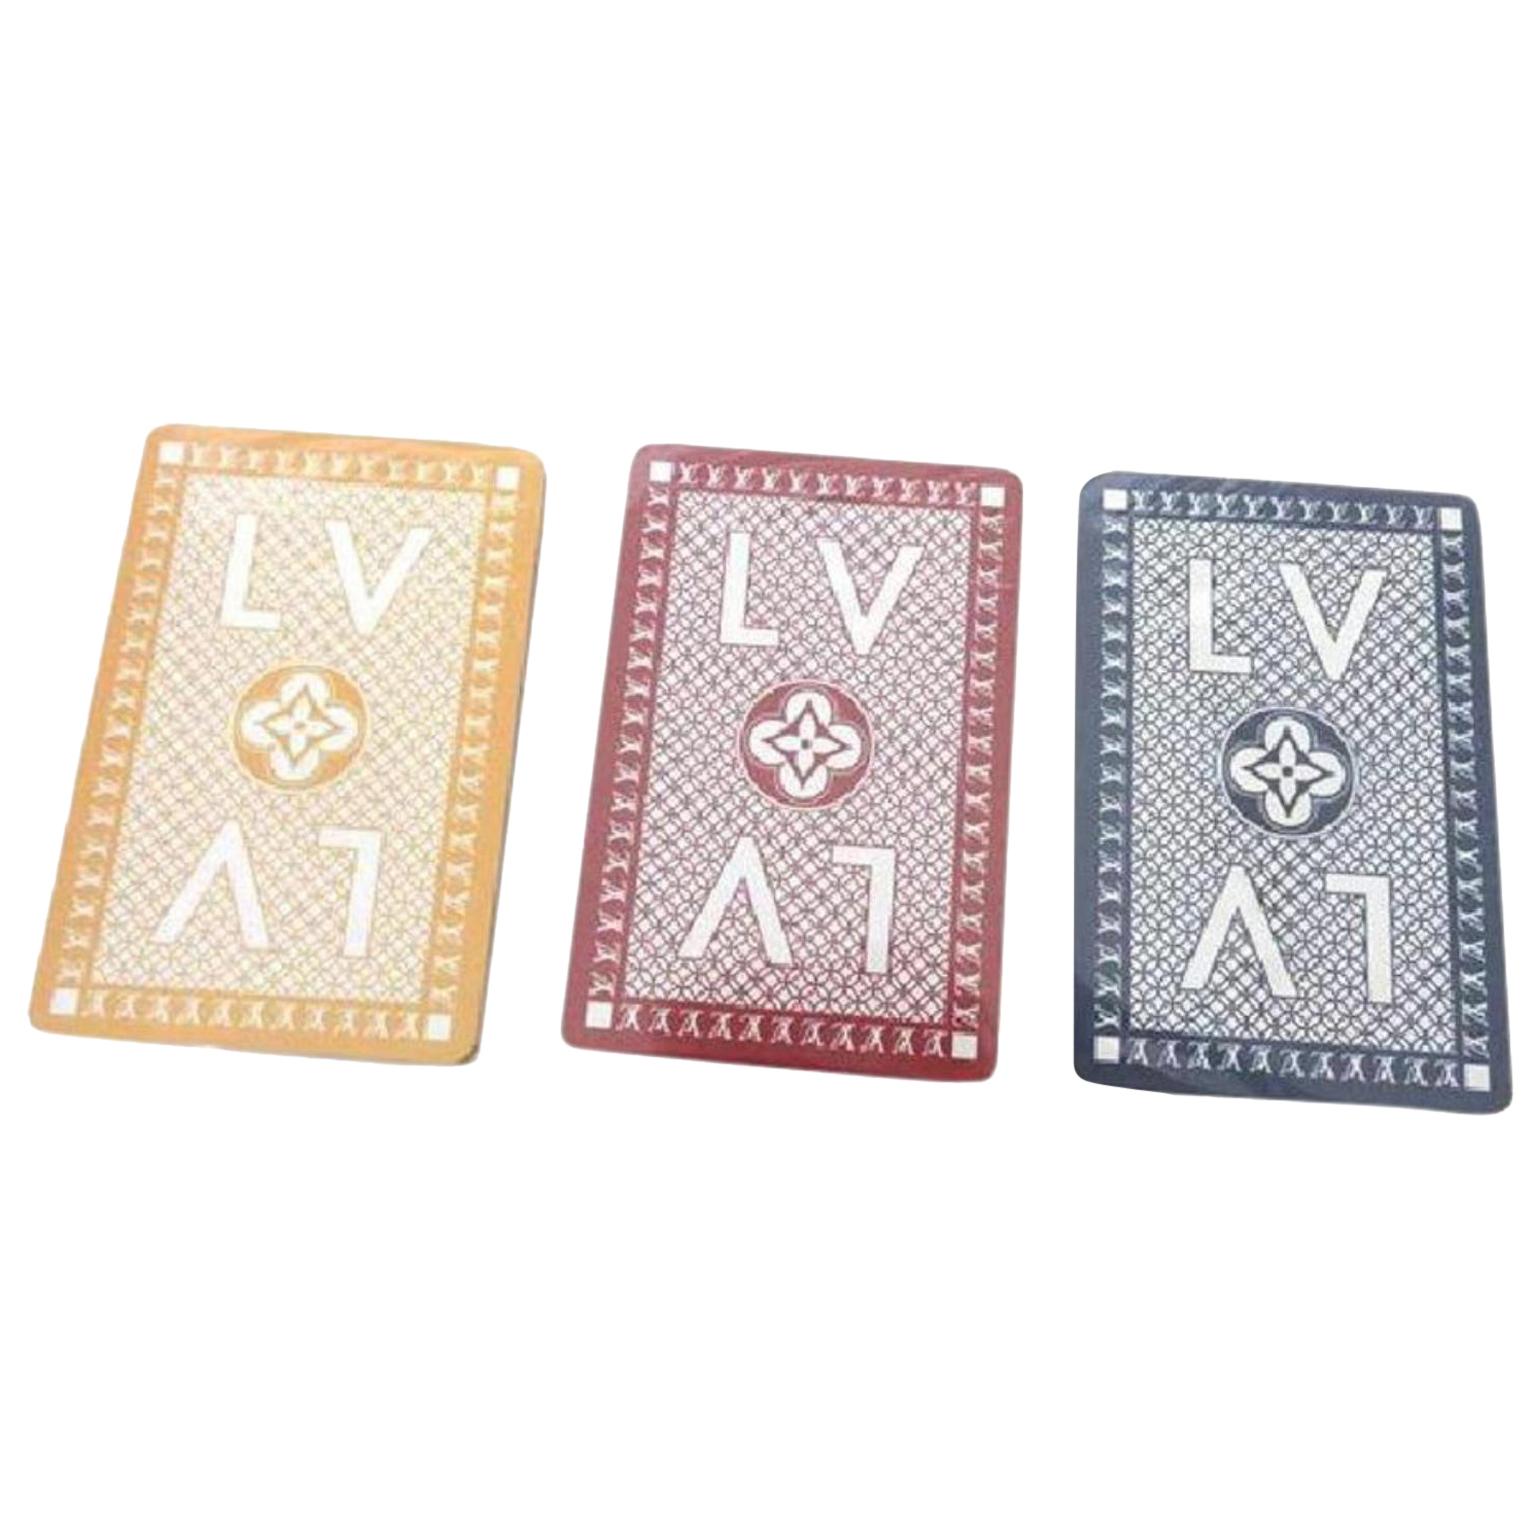 LOUIS VUITTON Playing Cards Monogram VIP gift novelty Color BLUE New ( I  26)